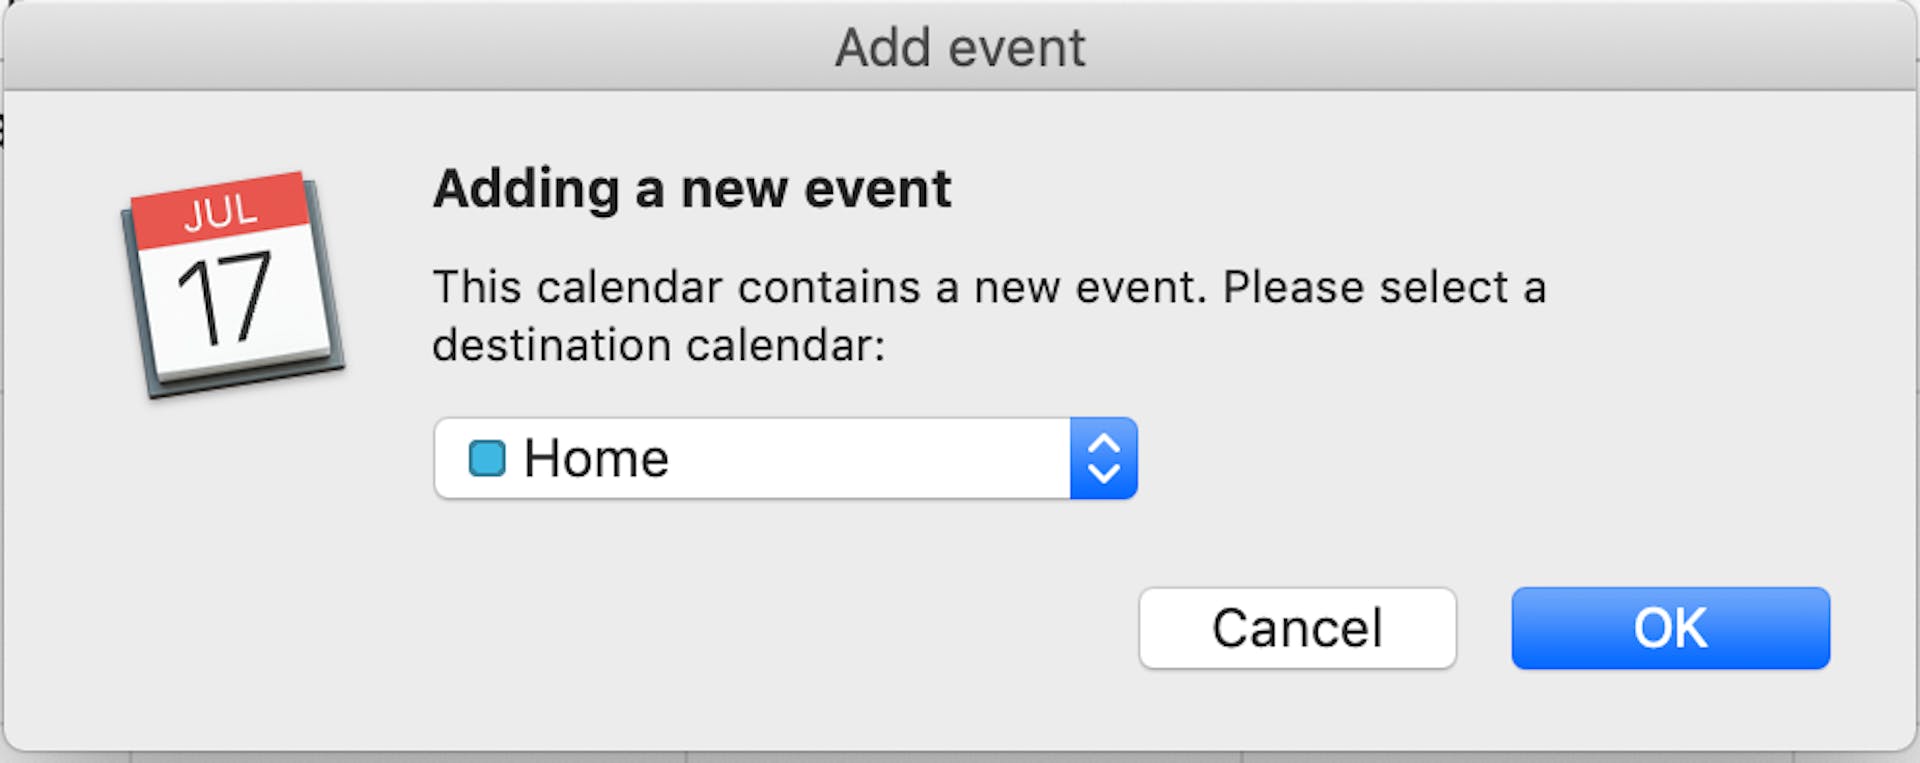 An image of an calendar prompt, asking whether to add a new event to your calendar